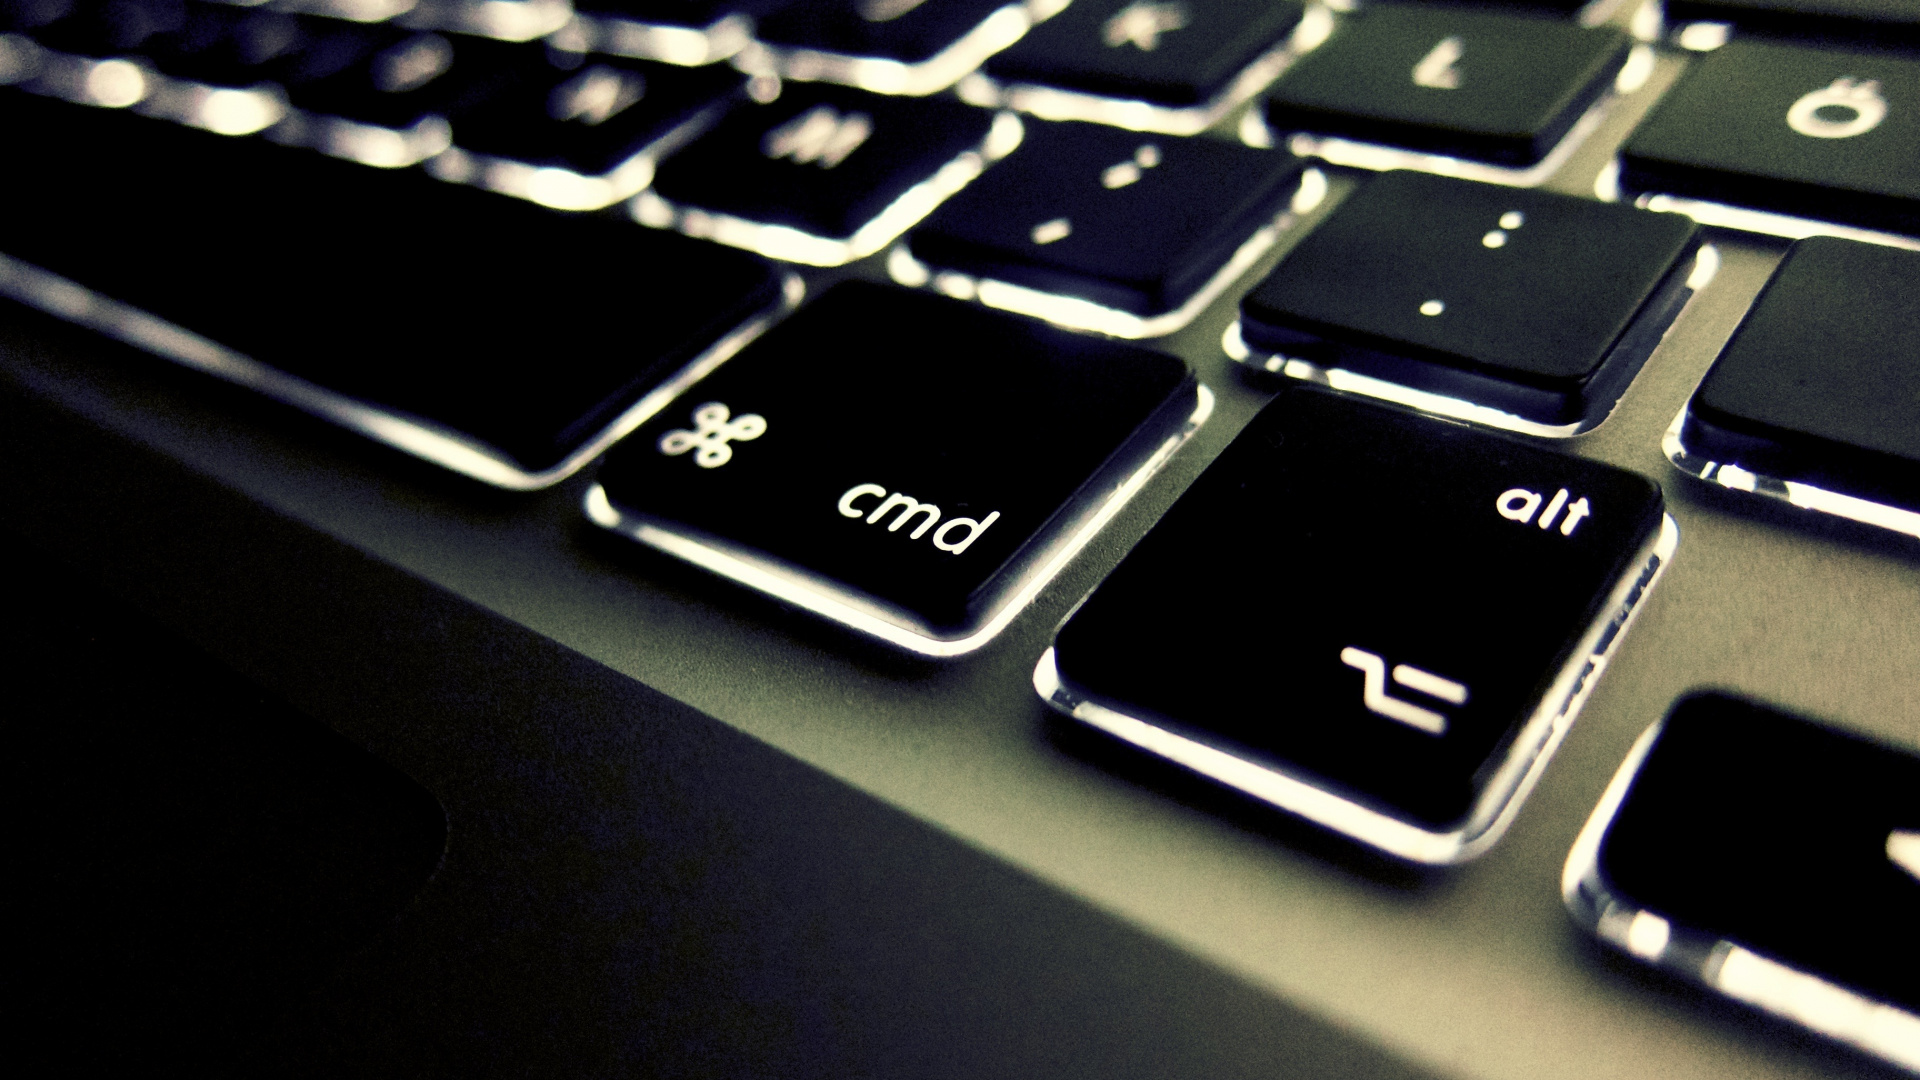 3,000+ Computer Keyboard Pictures for Free [HD] - Pixabay